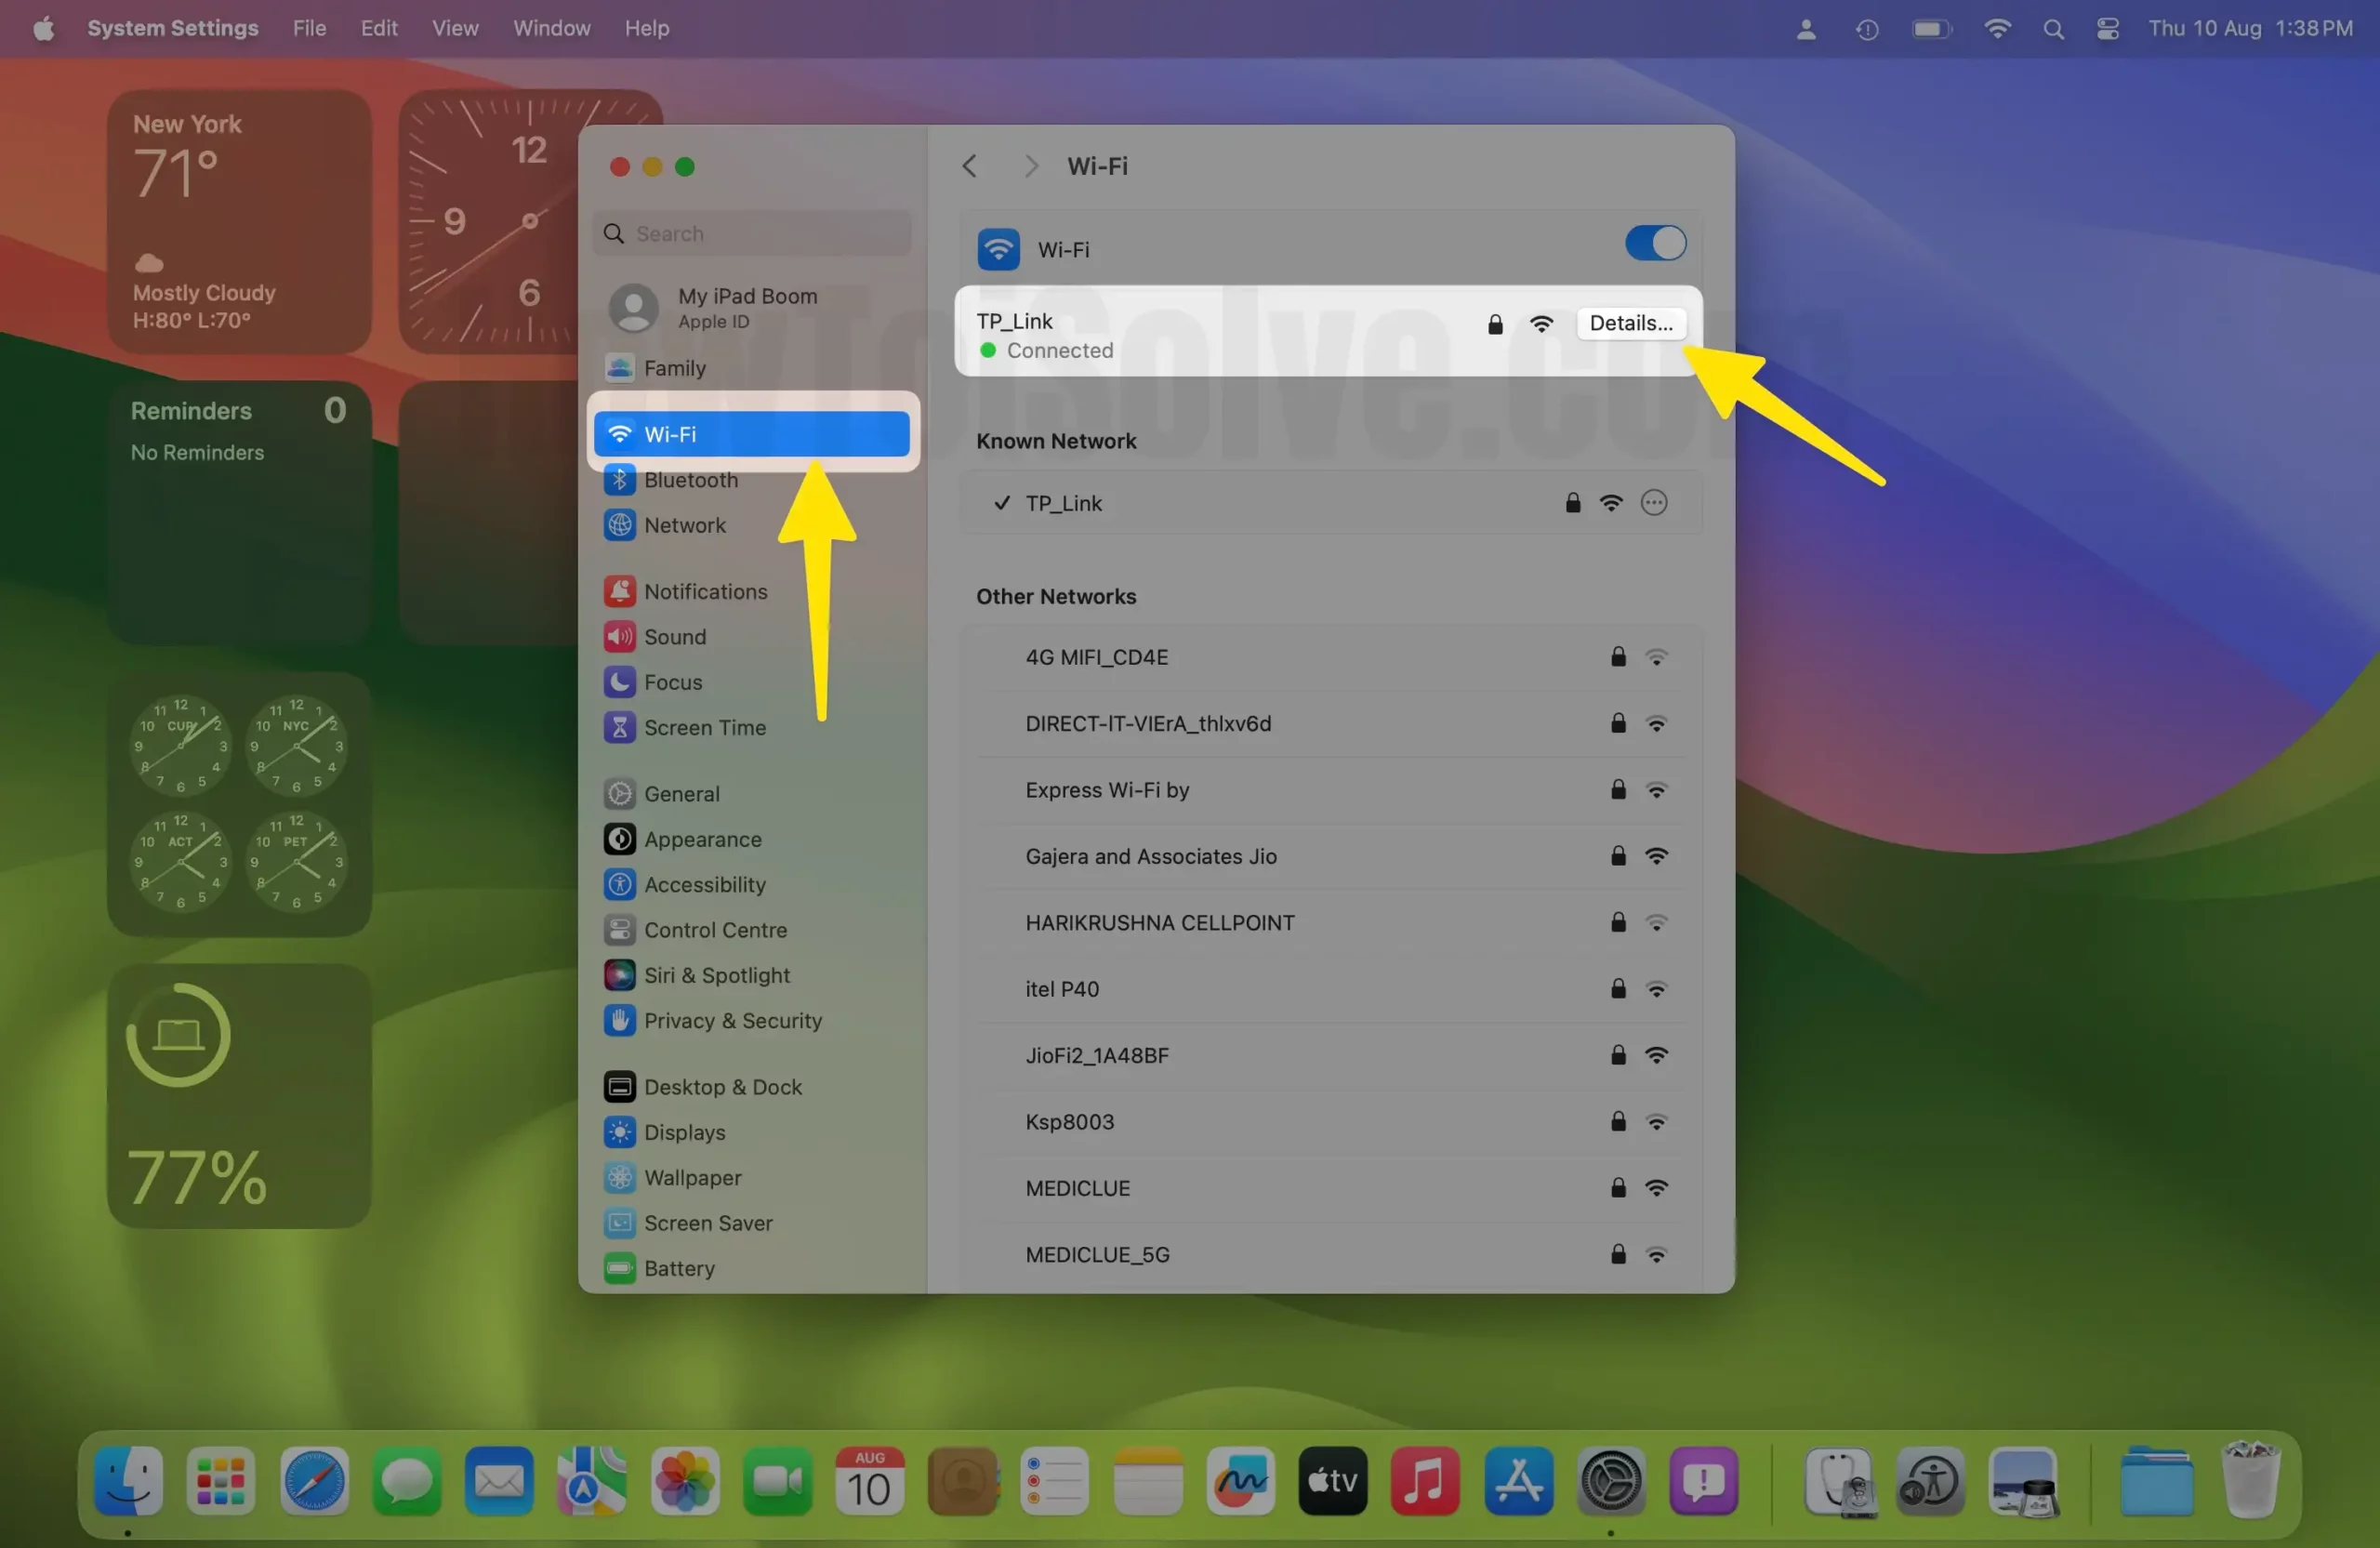 Open Connected WiFi Network Details on Mac